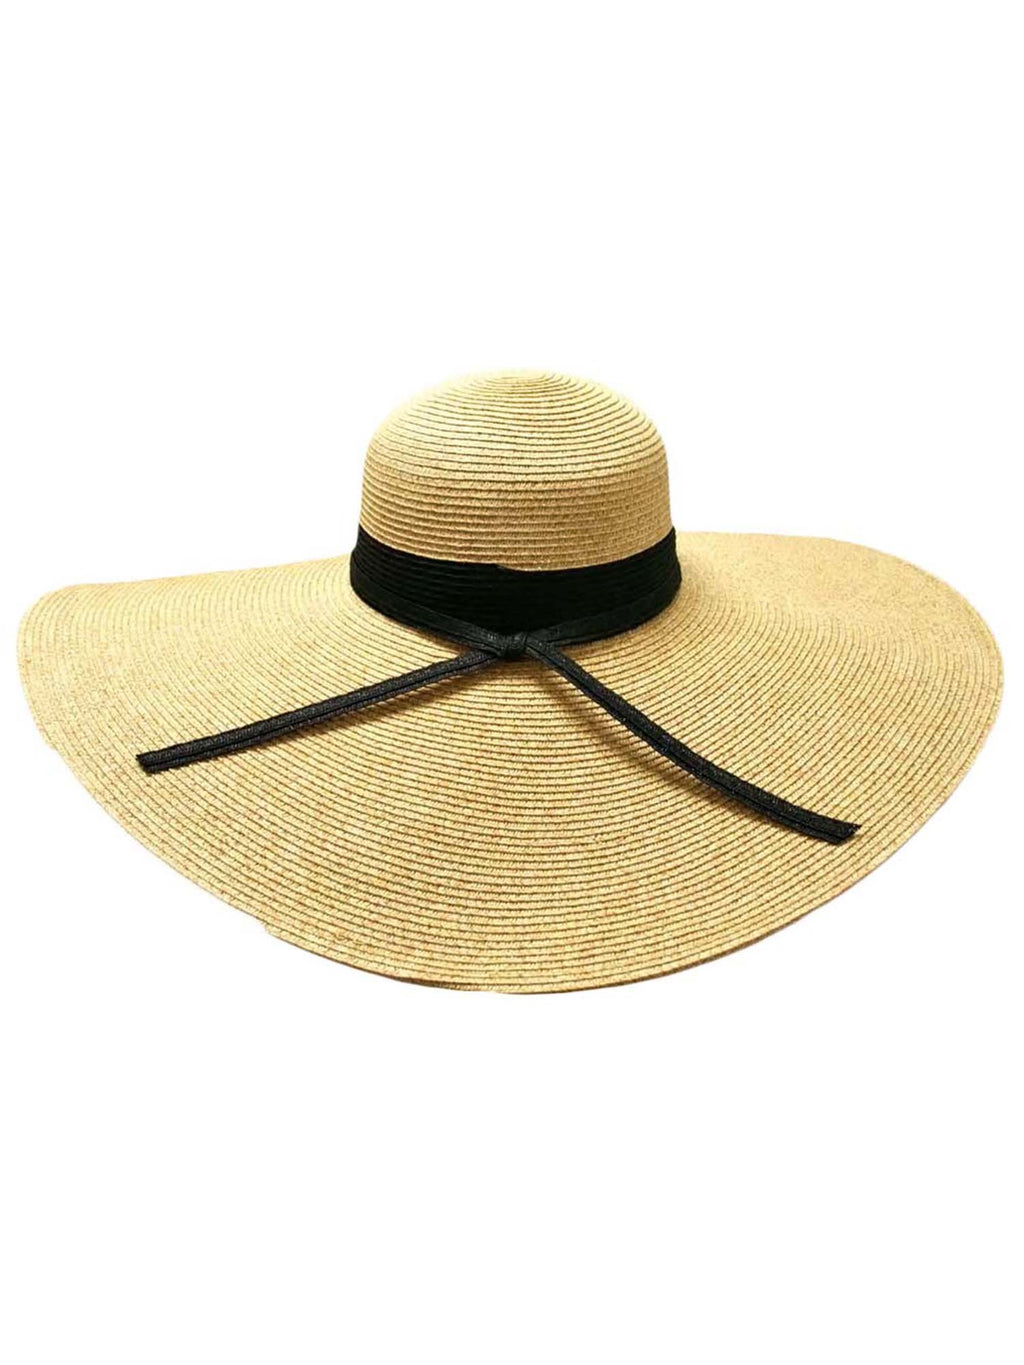 Natural Wide Brim Floppy Hat With Black Ribbon Hat Band